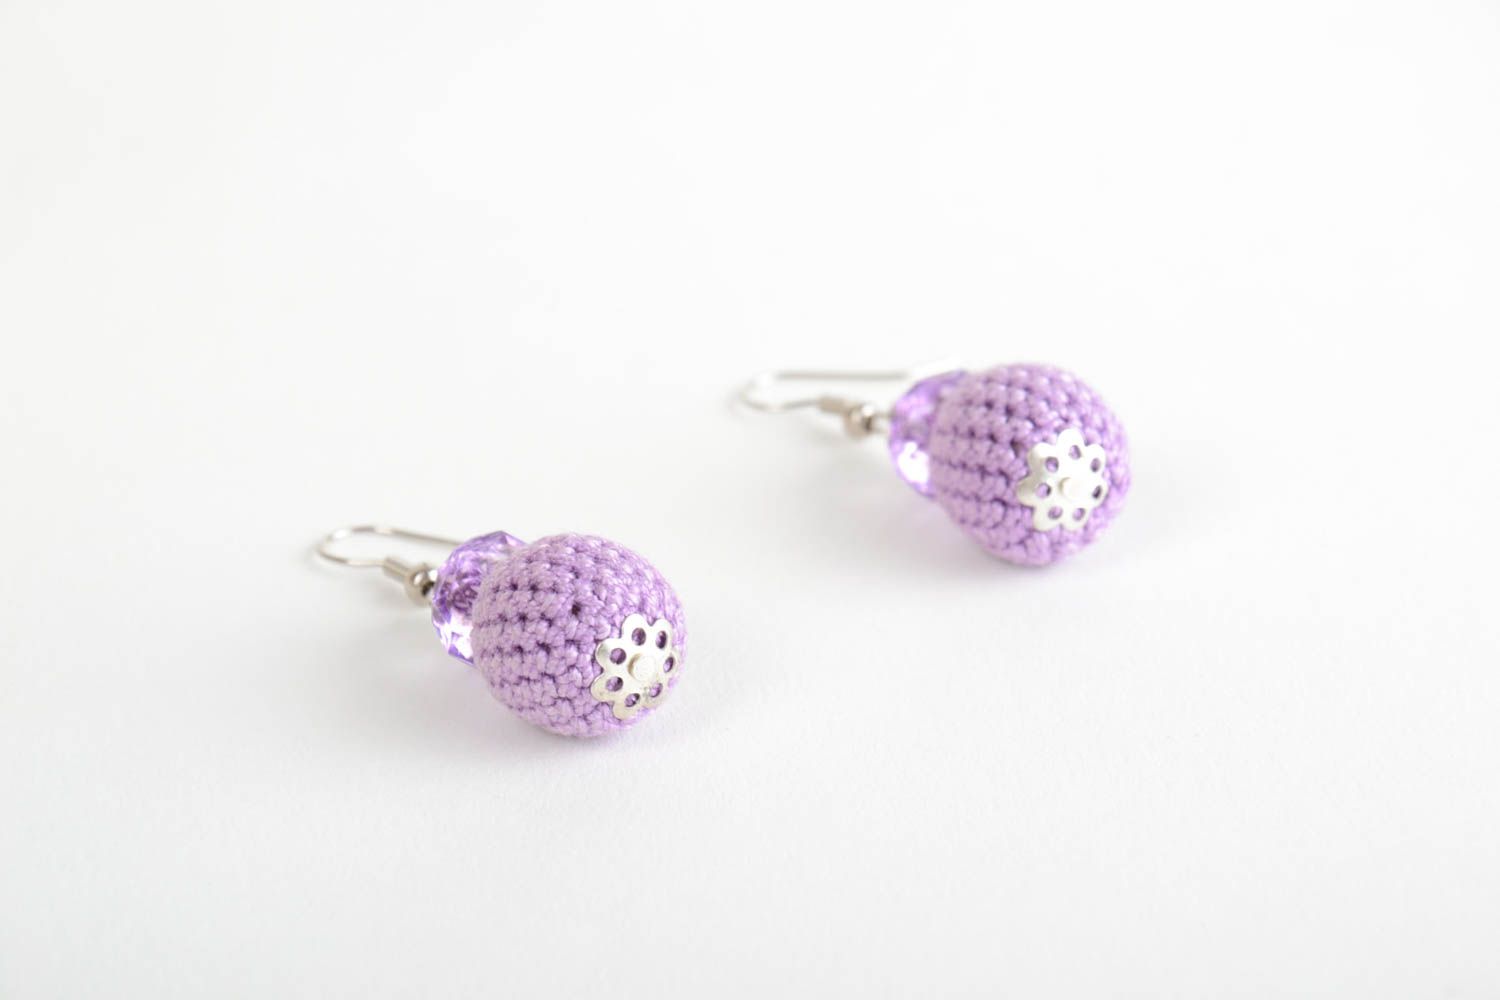 Handmade wooden bead earrings crocheted over with violet cotton threads photo 3